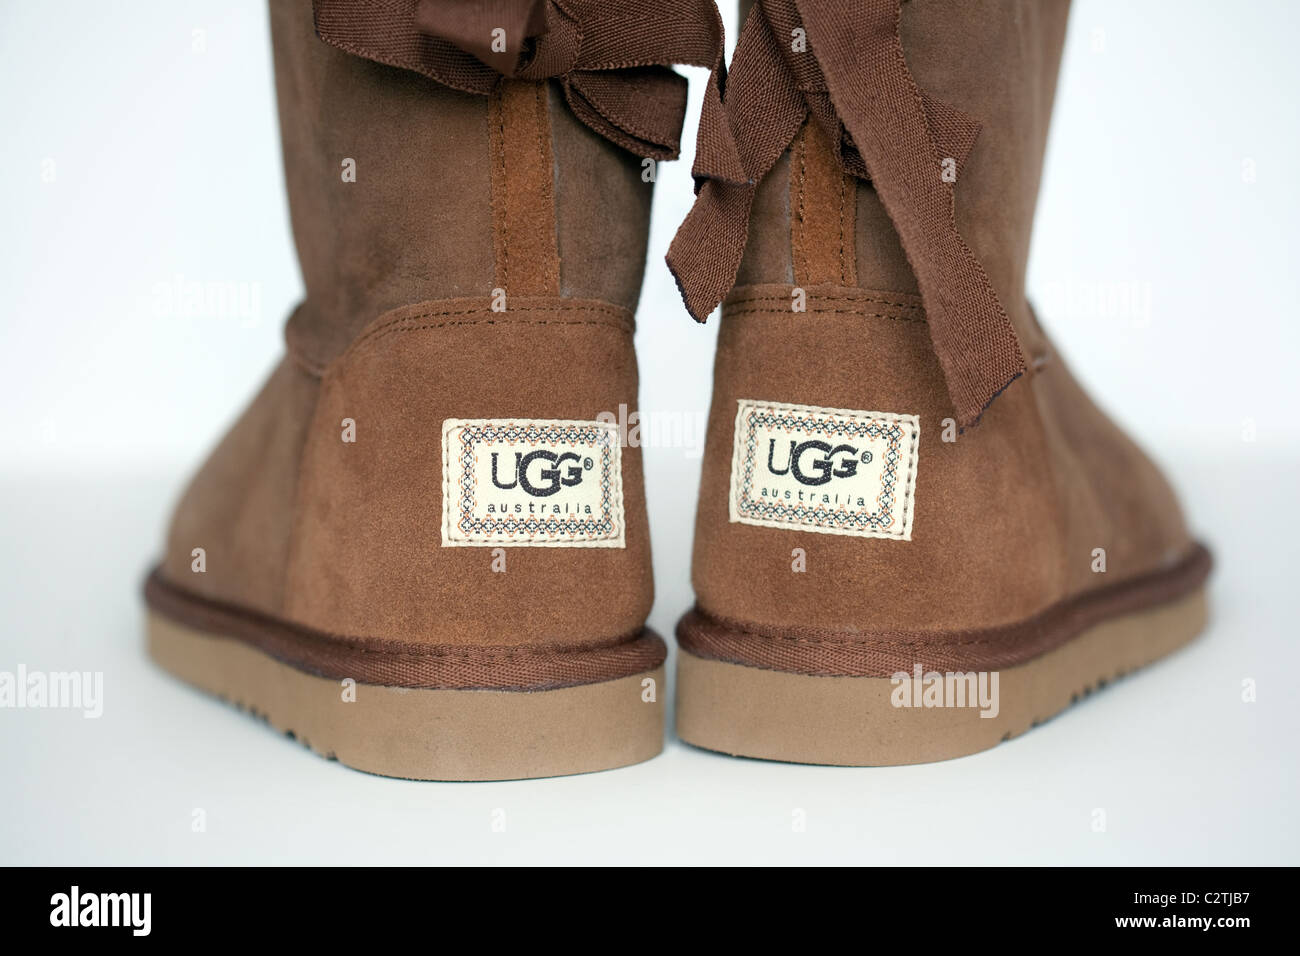 where are ugg boots made